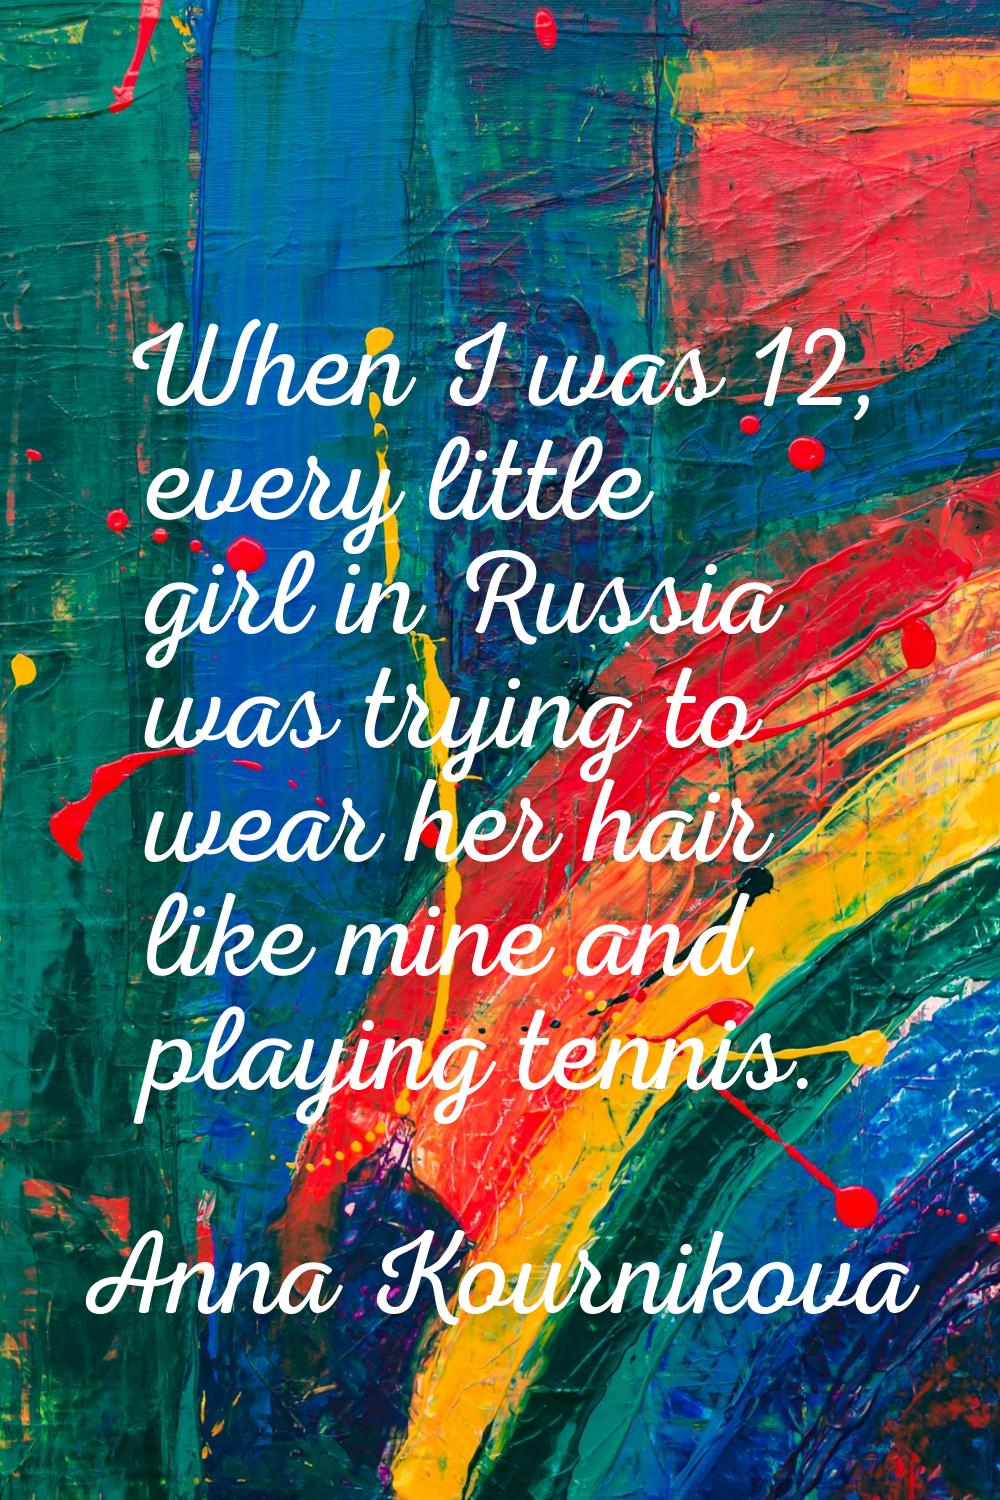 When I was 12, every little girl in Russia was trying to wear her hair like mine and playing tennis